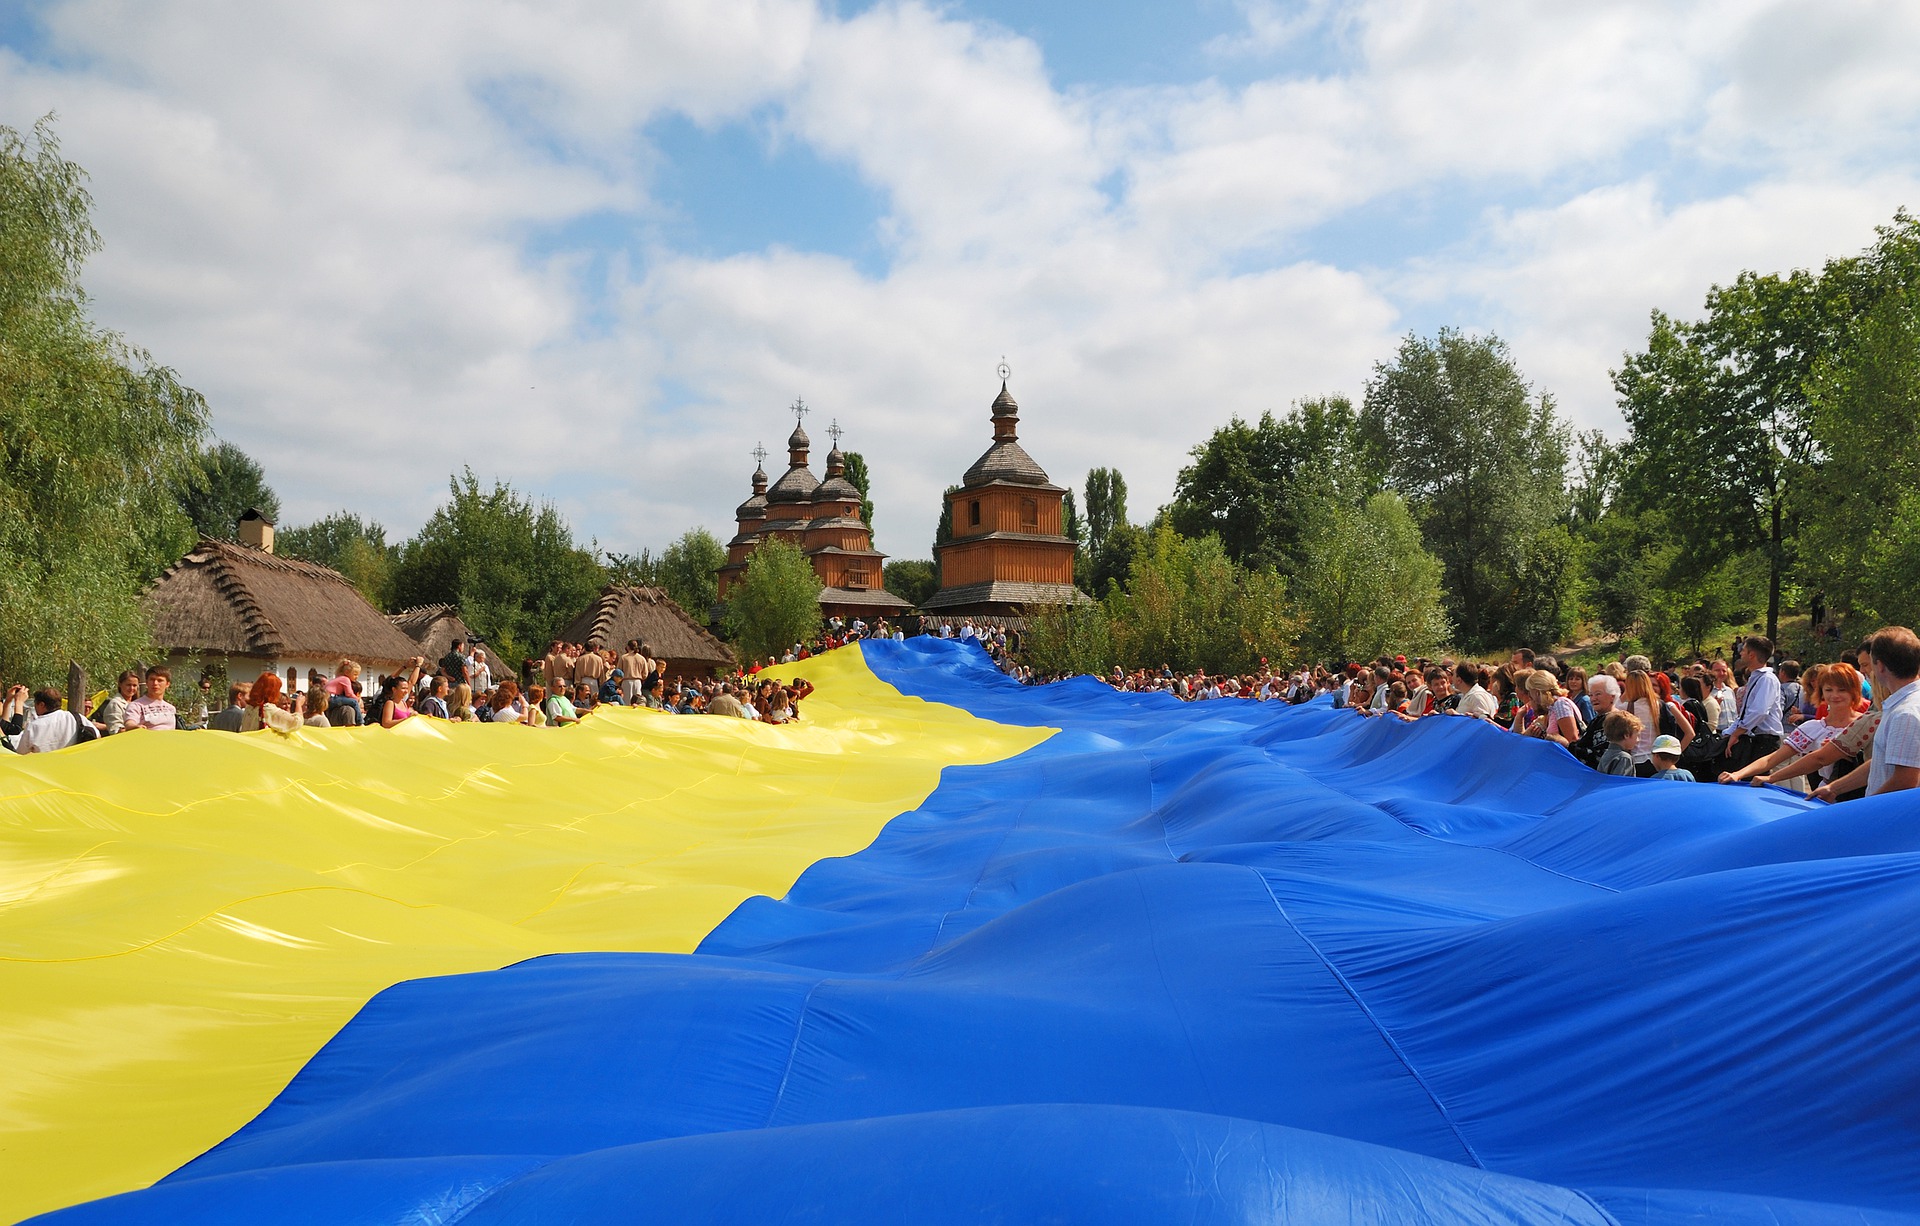 Democracy In Action: Ukraine Adopts Law To Send Russians To Internment Camps In Case Of "Aggression"